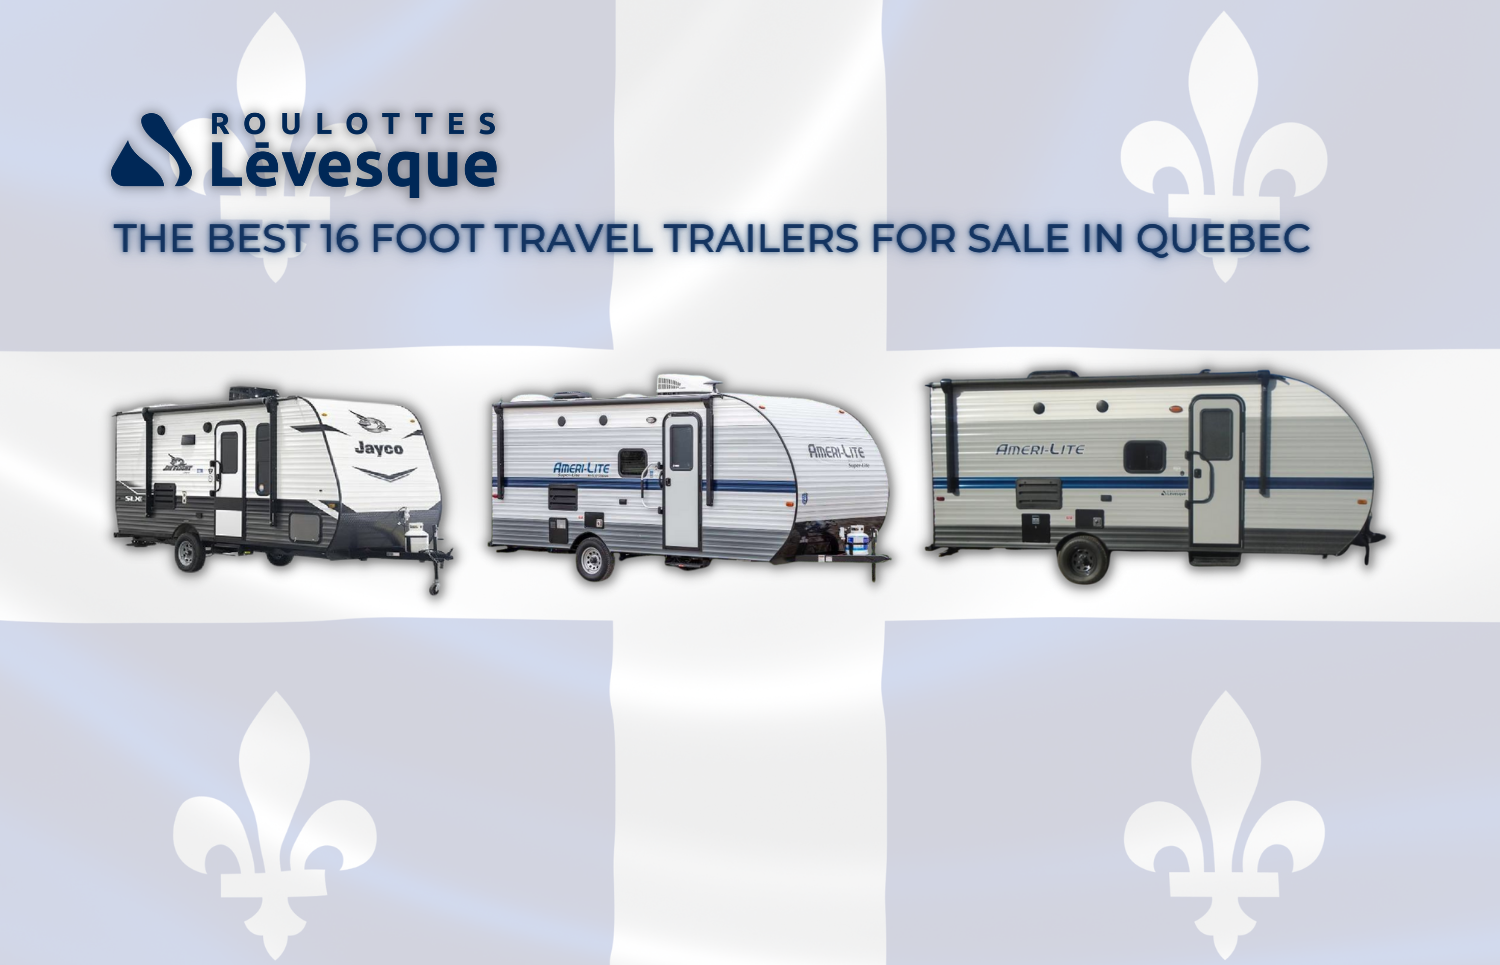 The Best 16 foot Travel Trailers for Sale in the Province of Quebec